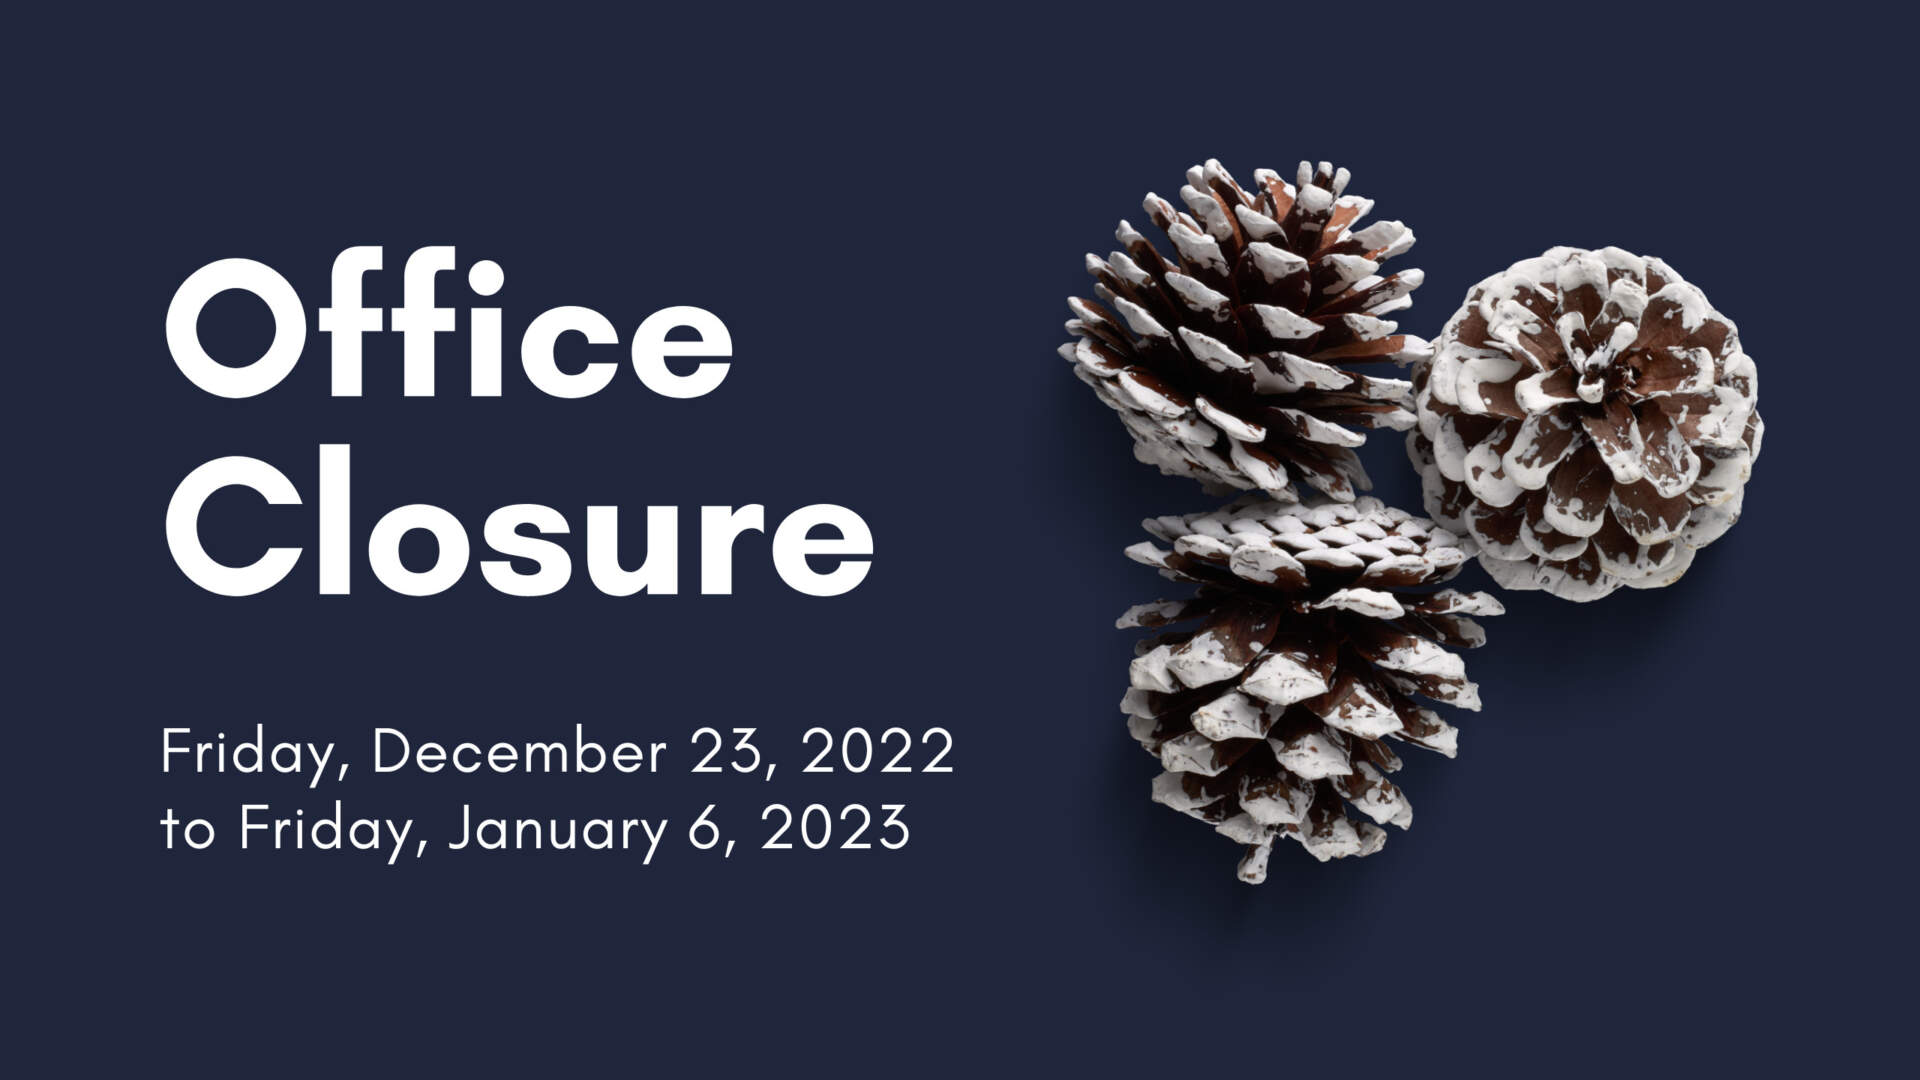 Dark background with three frosted pine cones and text that reads "Office Closure Friday, December 23, 2022 to Friday, January 6, 2023"